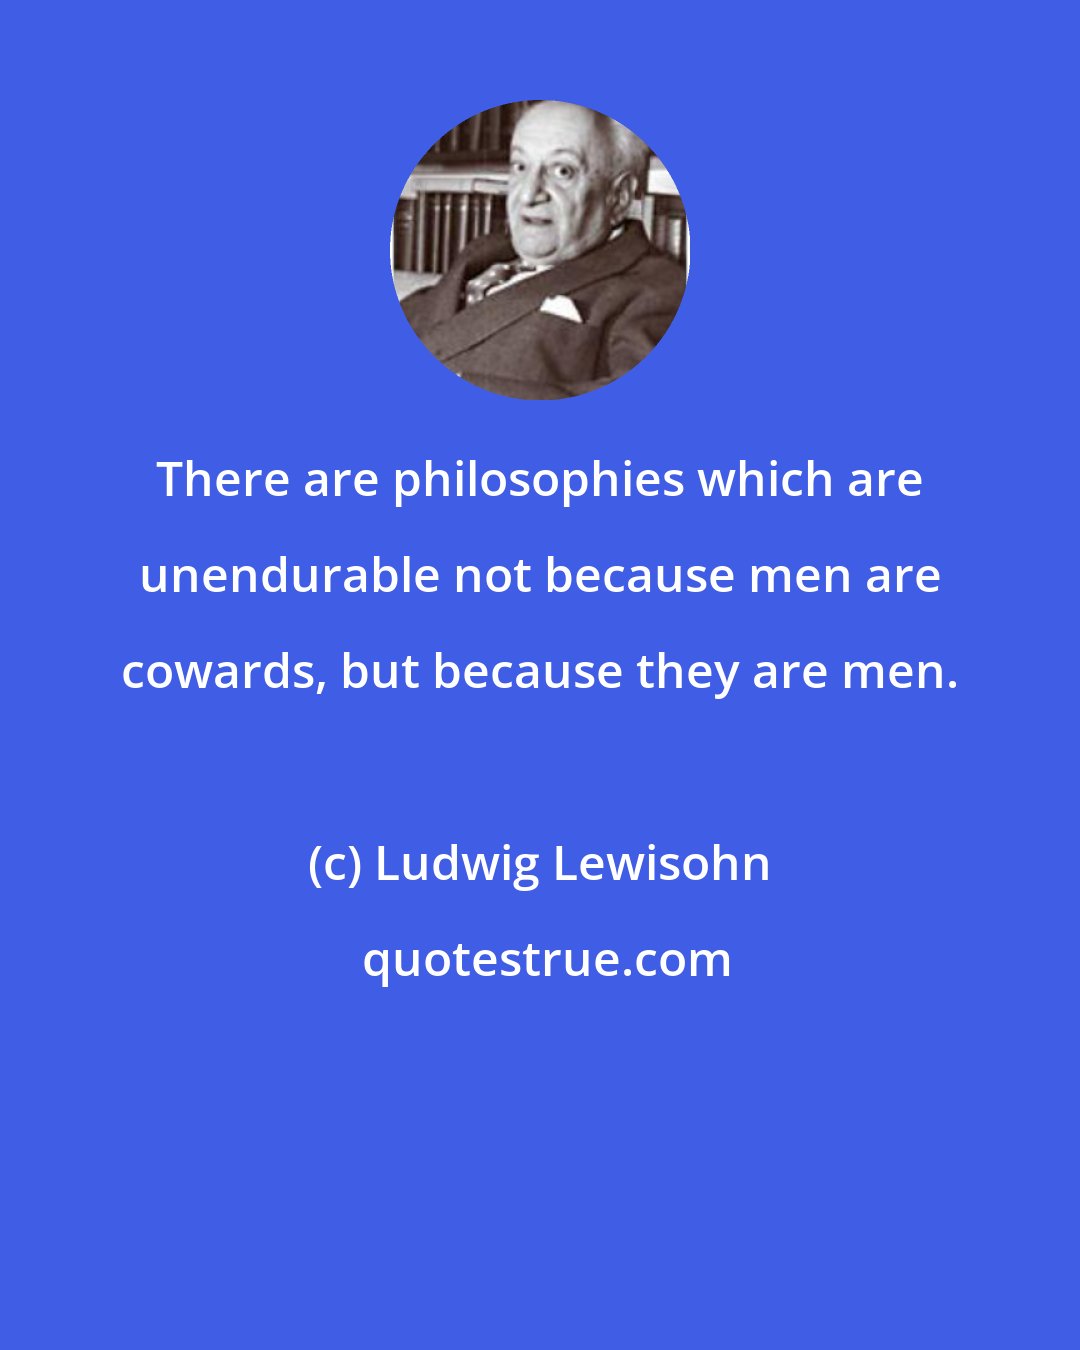 Ludwig Lewisohn: There are philosophies which are unendurable not because men are cowards, but because they are men.